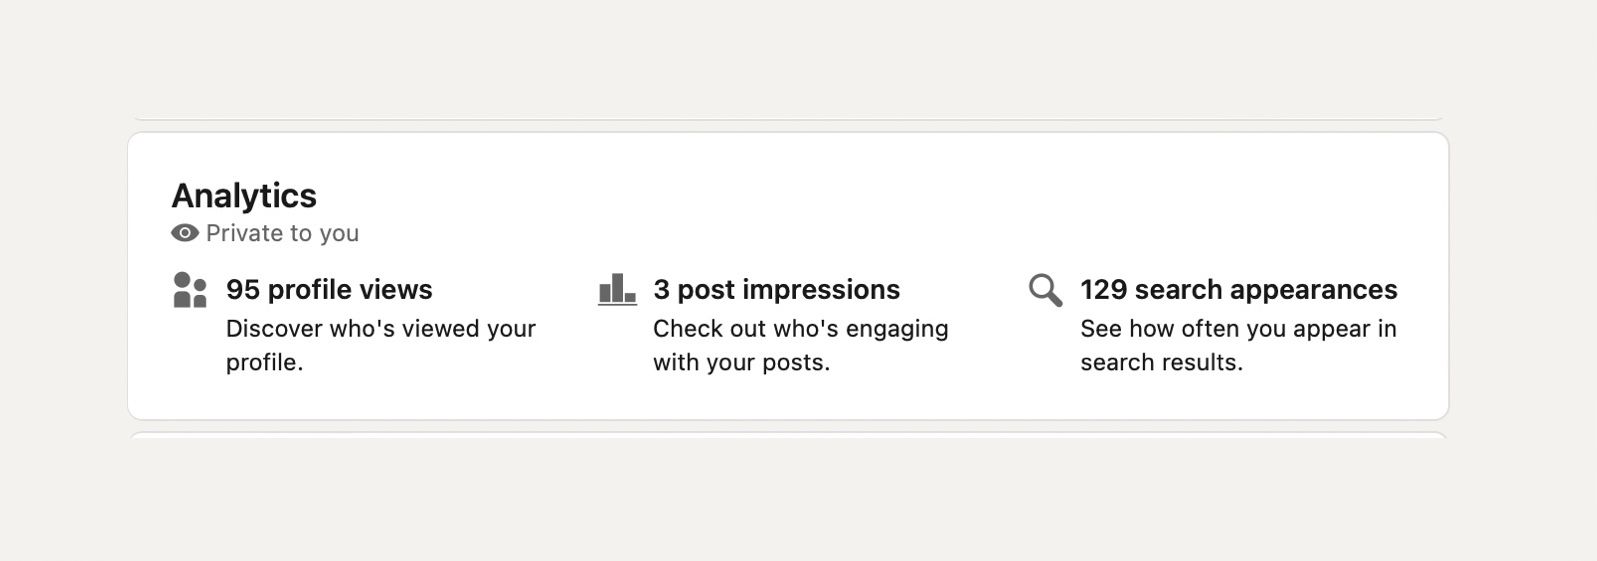 screenshot of linkedin analytics for a personal page